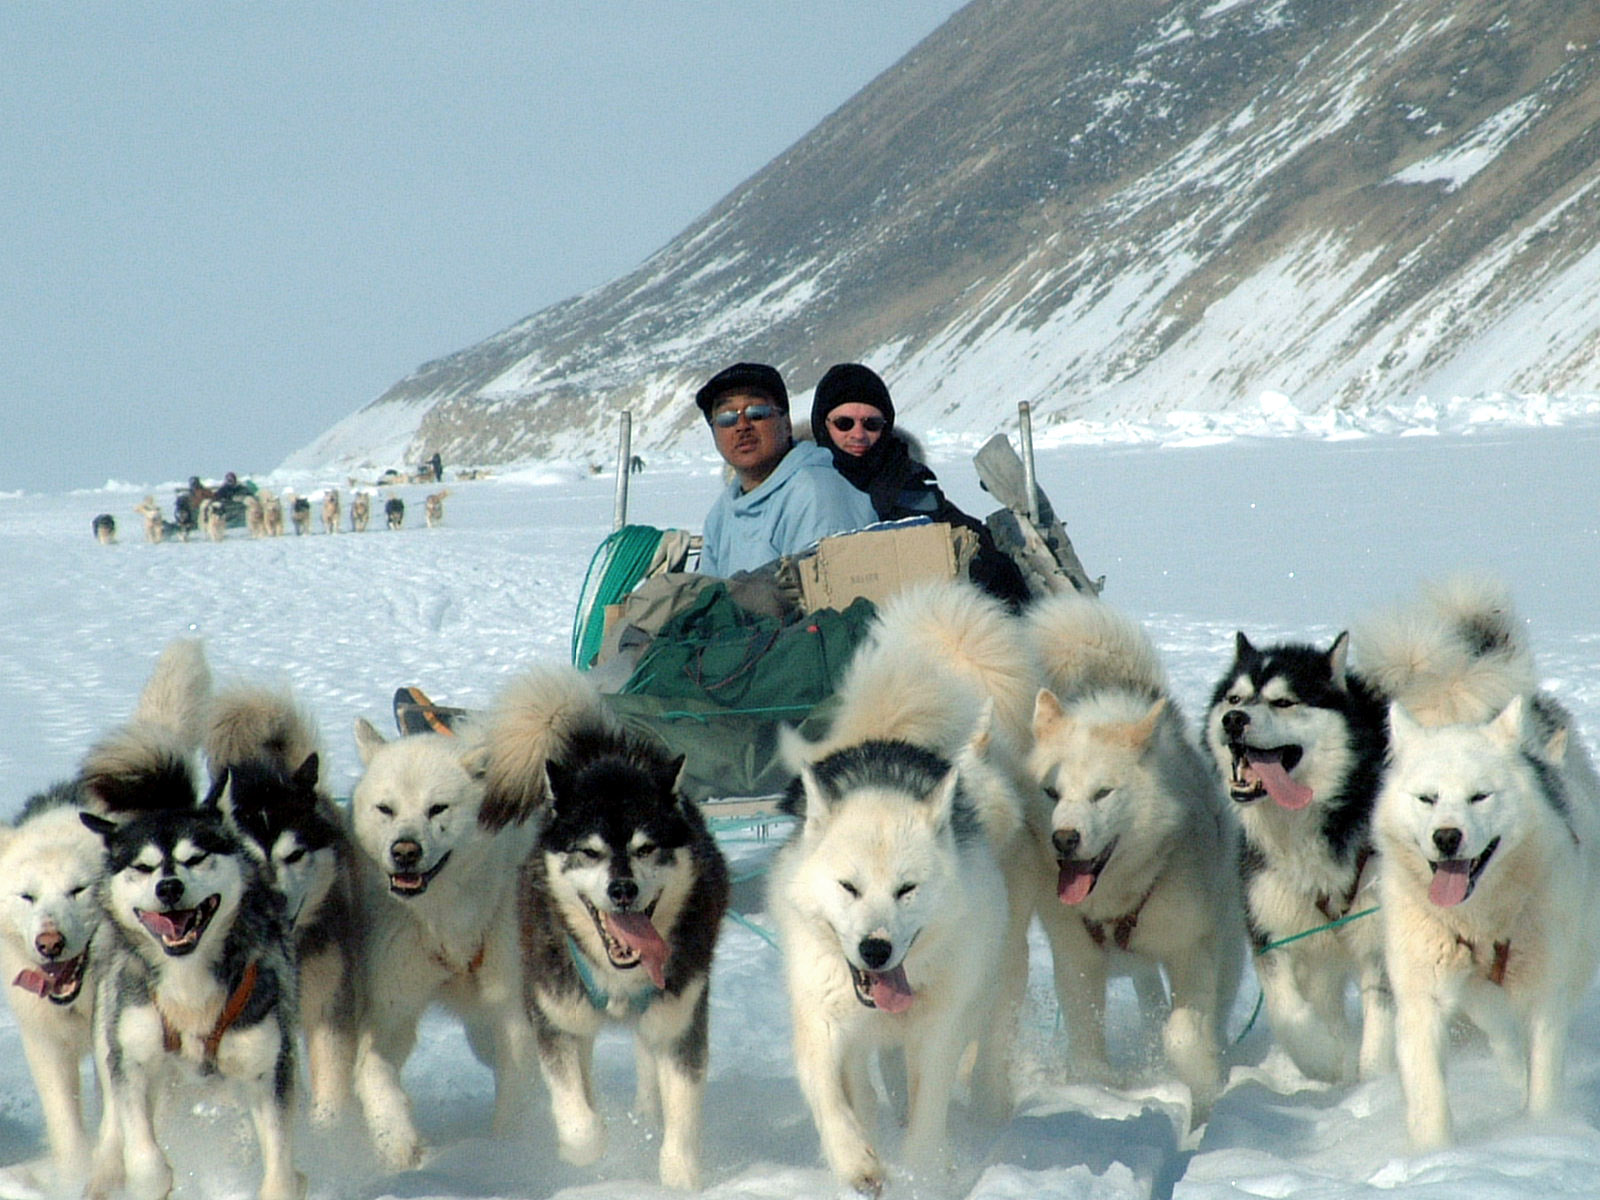 Image shows a photo of a sled carrying two men being pulled by 8 huskies.